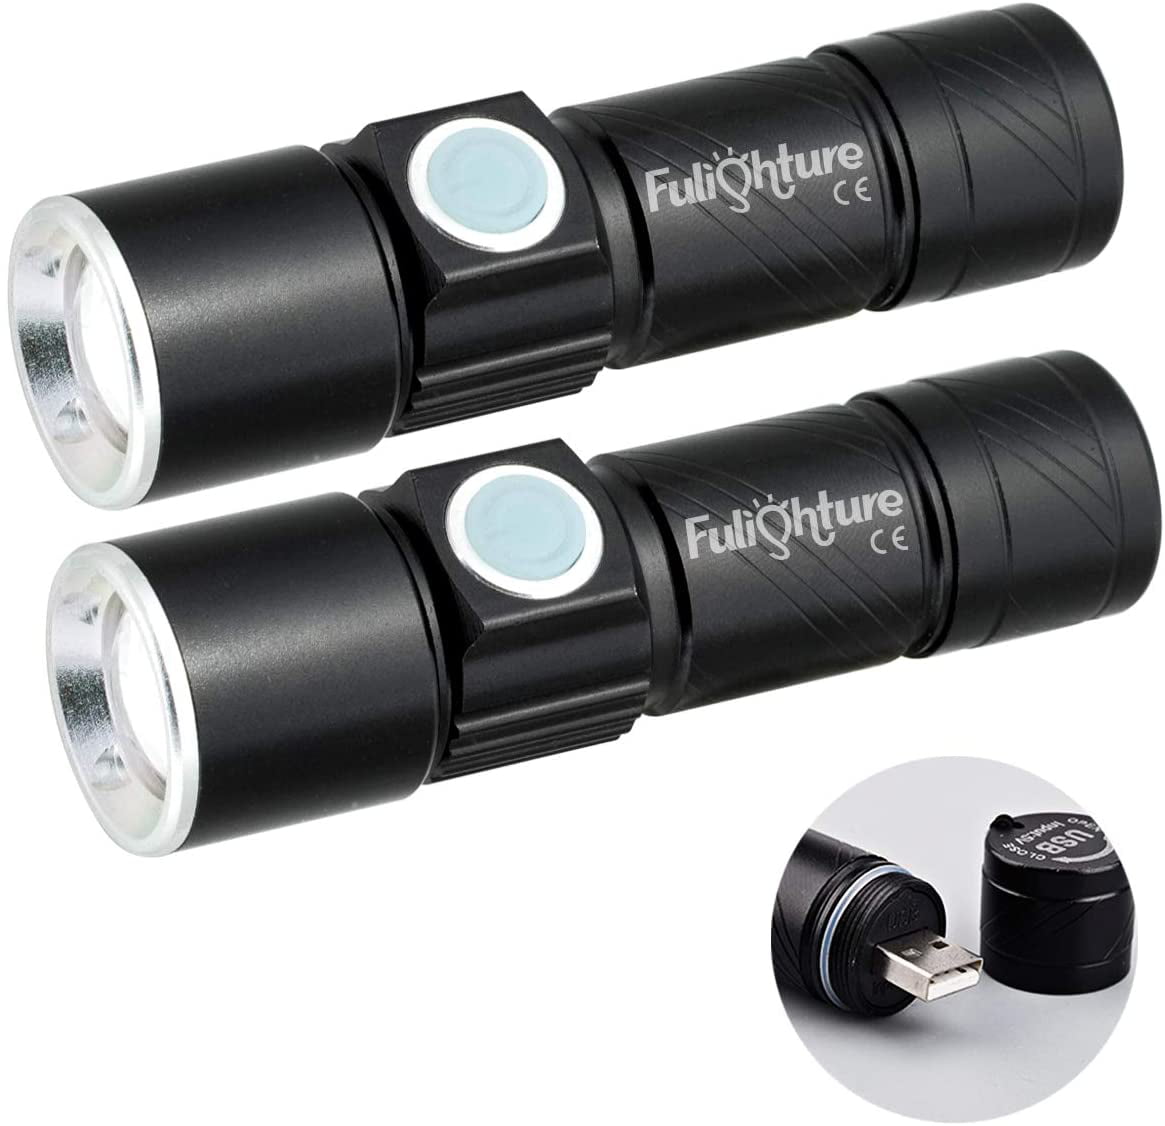 3 Pack Mini Flashlight Zoomable Tactical Flashlight Torch Light+Battery+Charger 